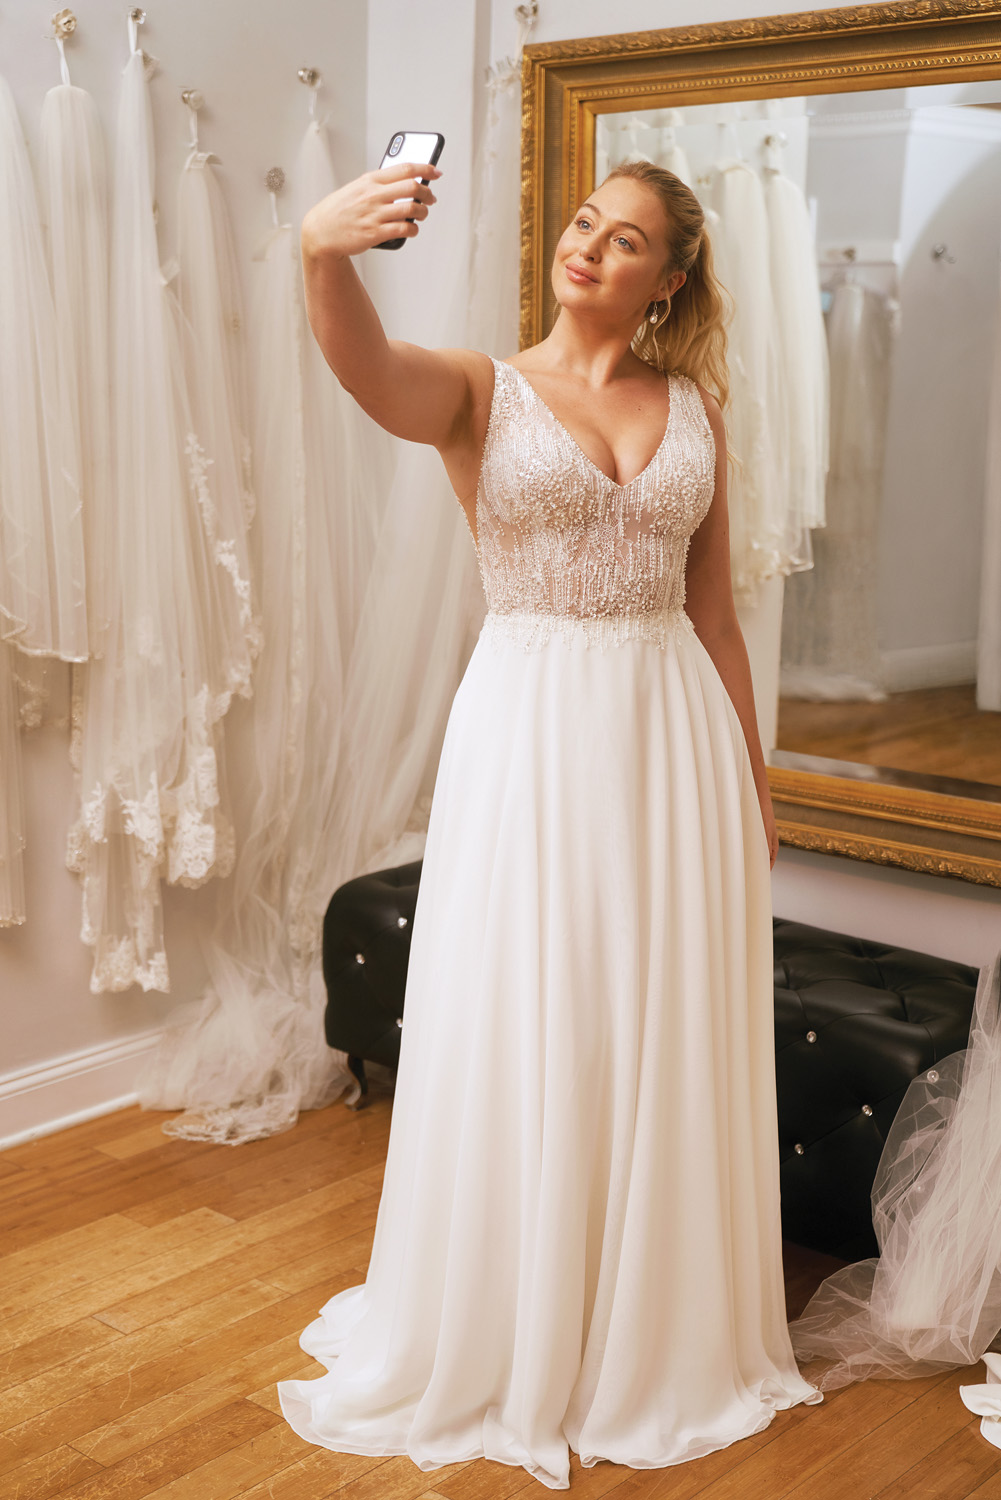 Dress Preview: Here Comes The Dress | The Wedding Mag